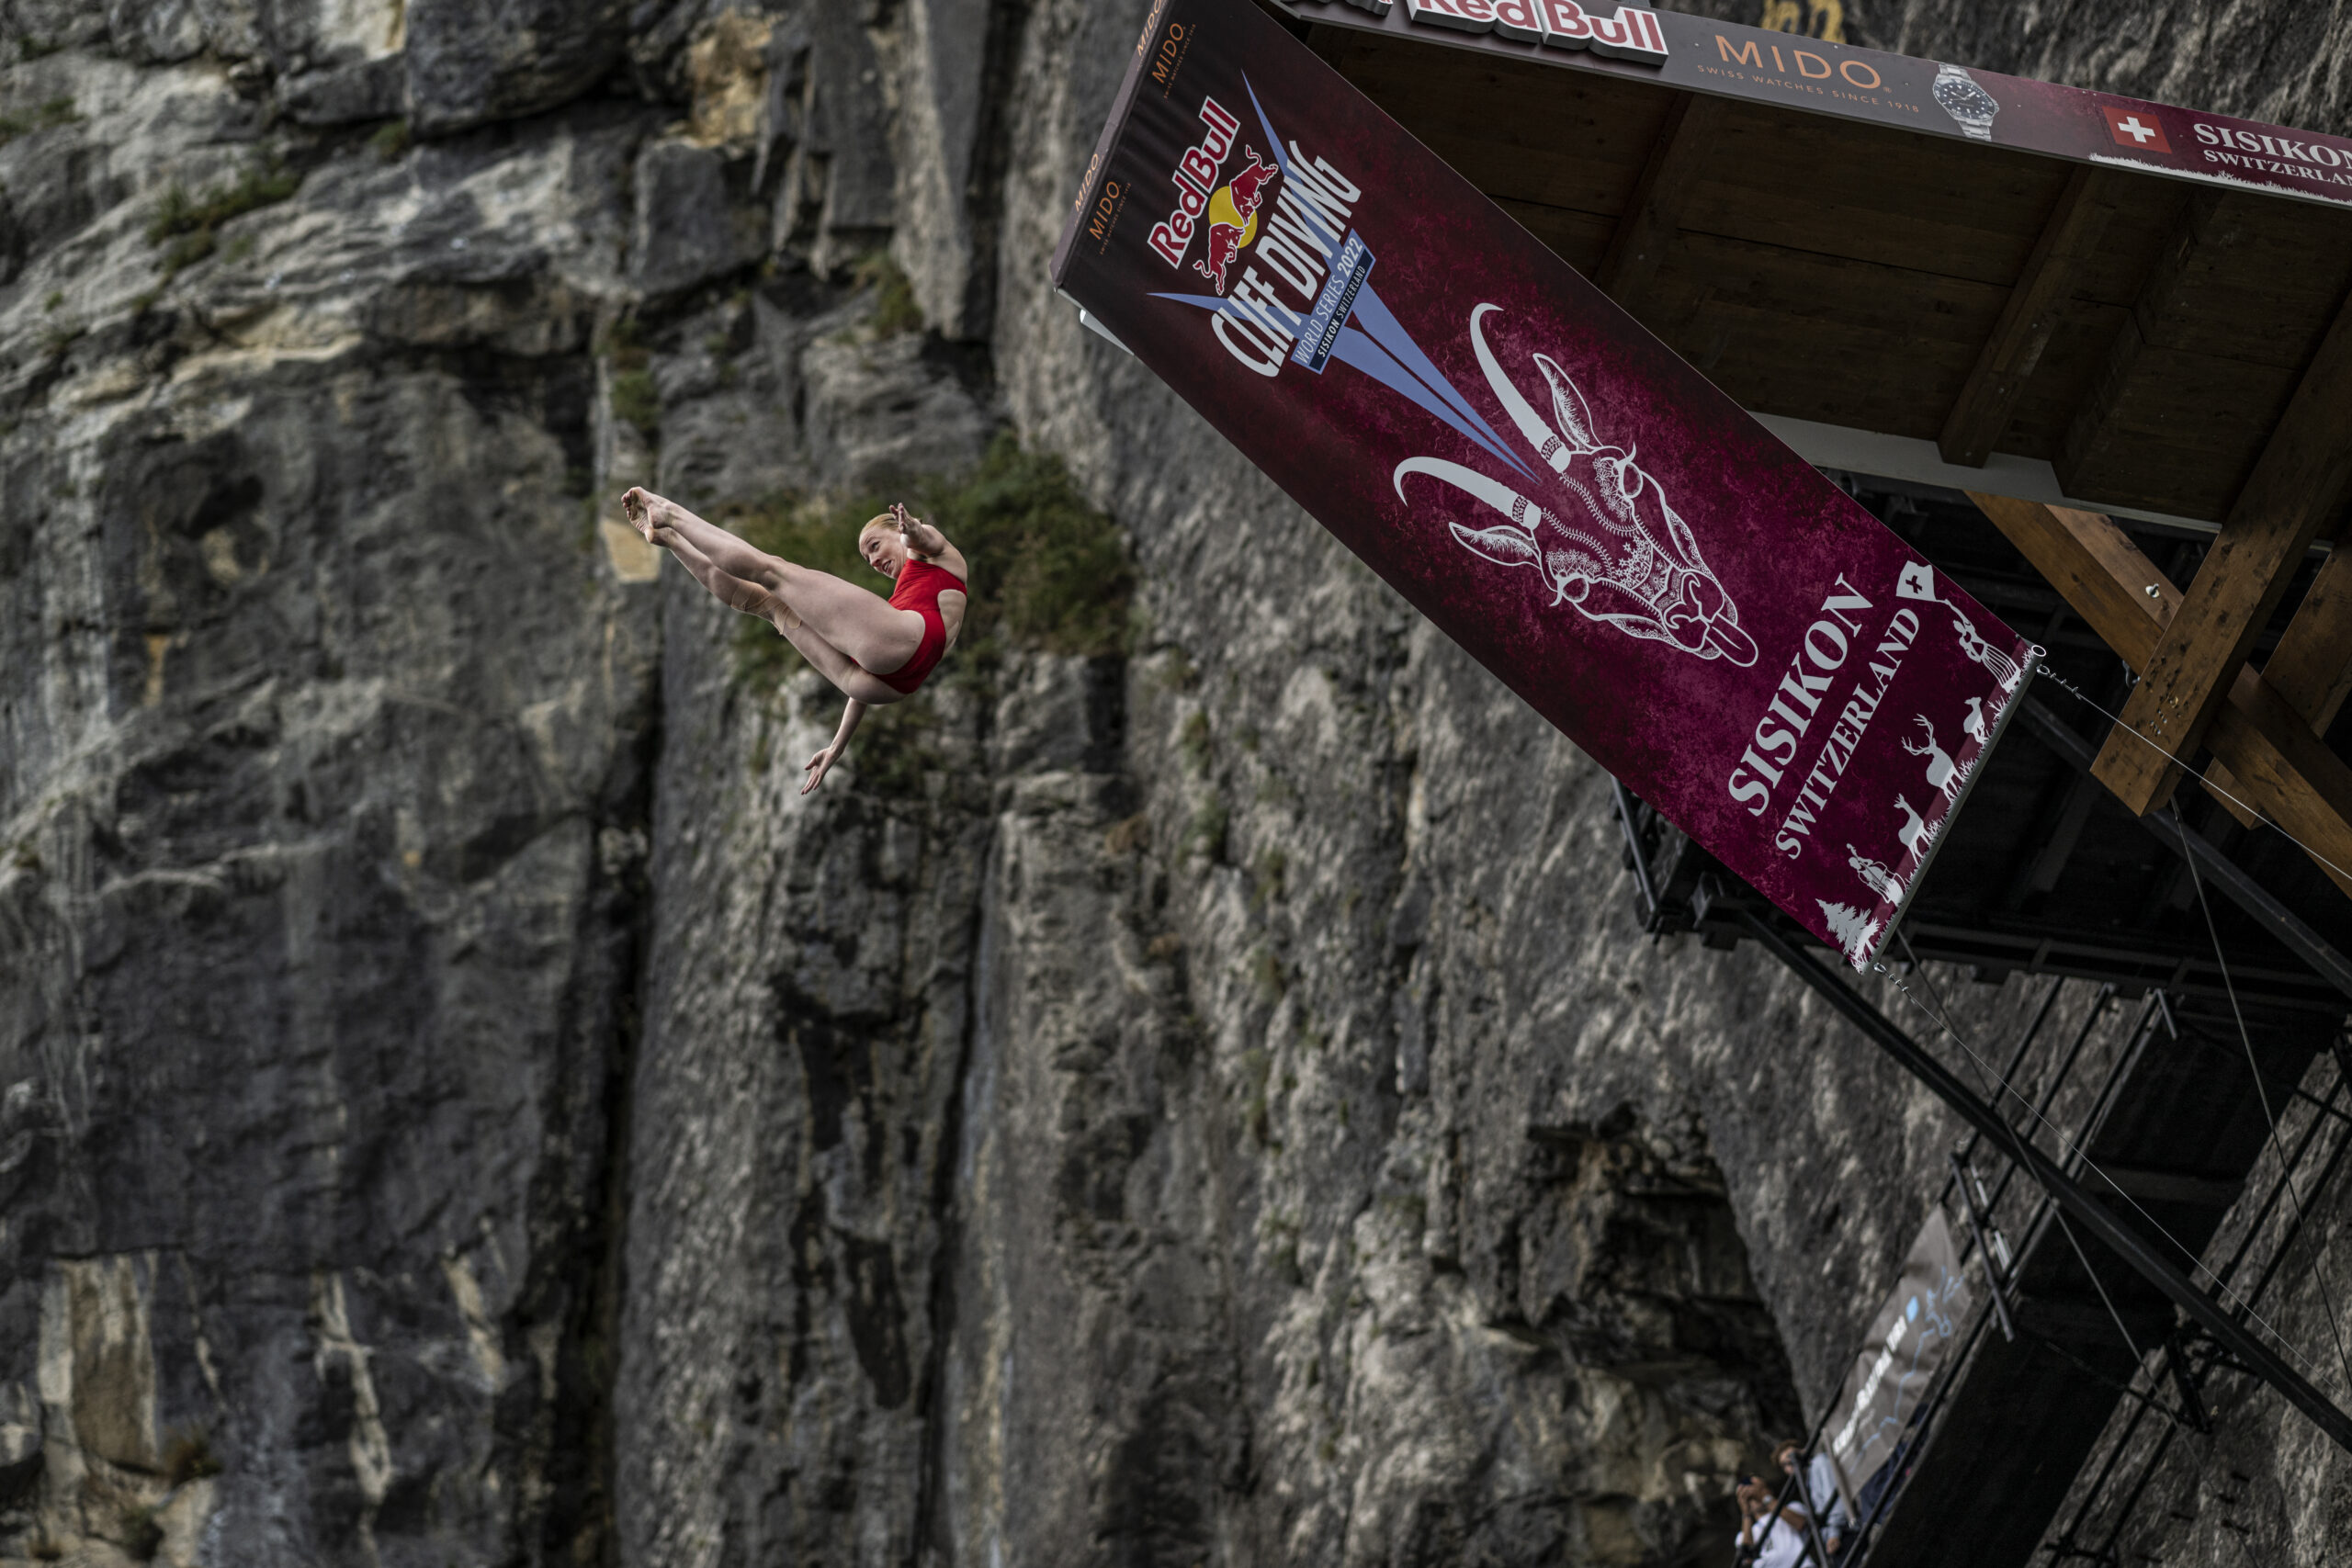 Molly Carlson takes silver with a brand new dive at the Red Bull Cliff Diving World Series in Switzerland